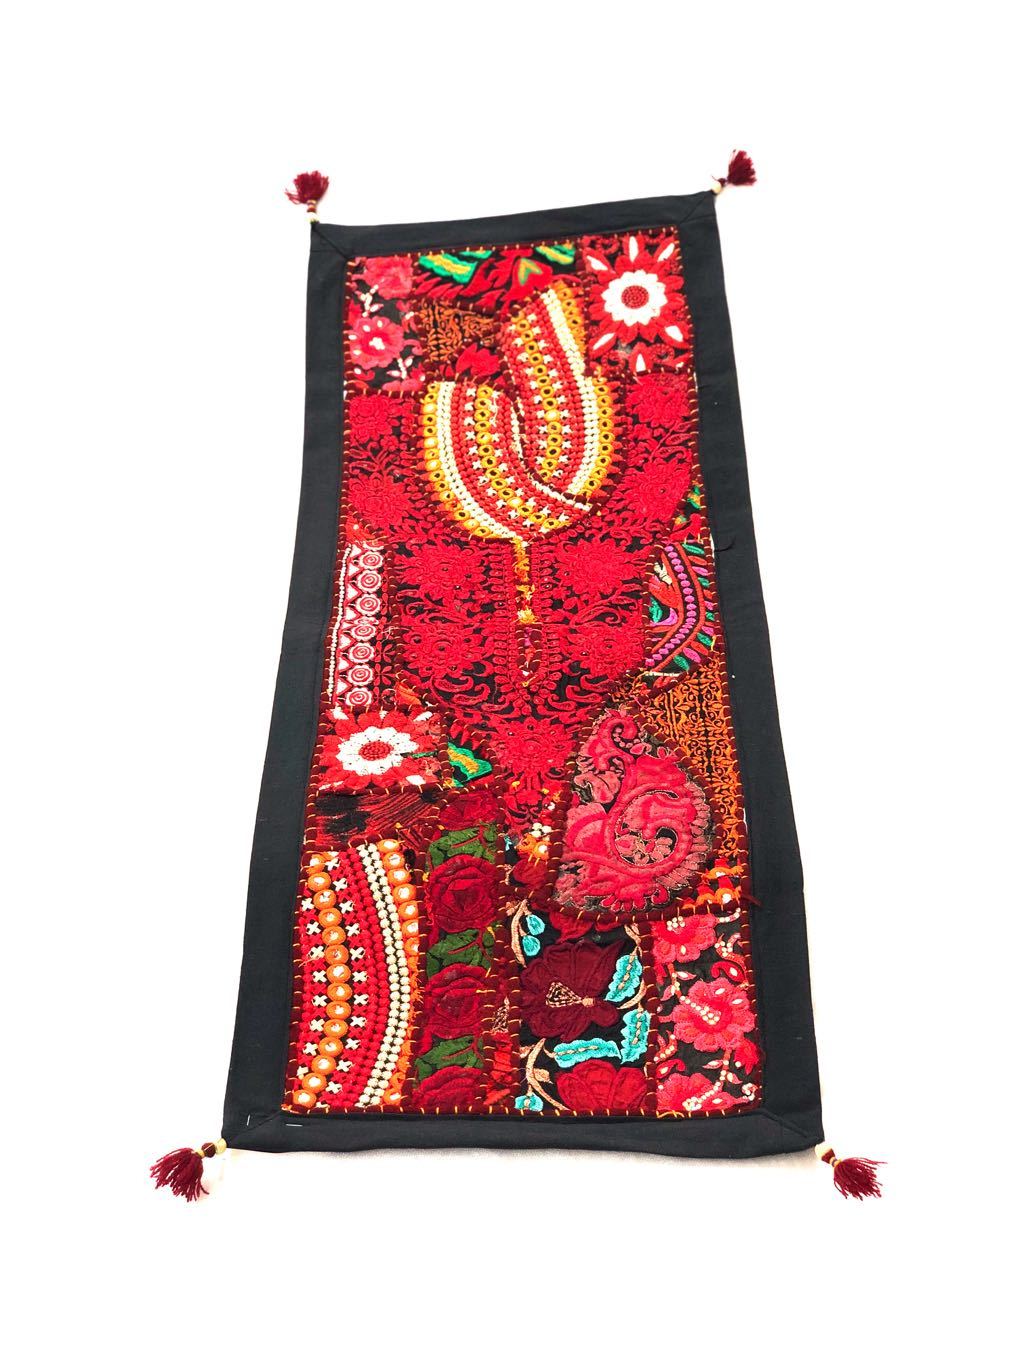 Embroidery Tapestry Table Runner Wall Hanging Shades Of Red Tamrapatra